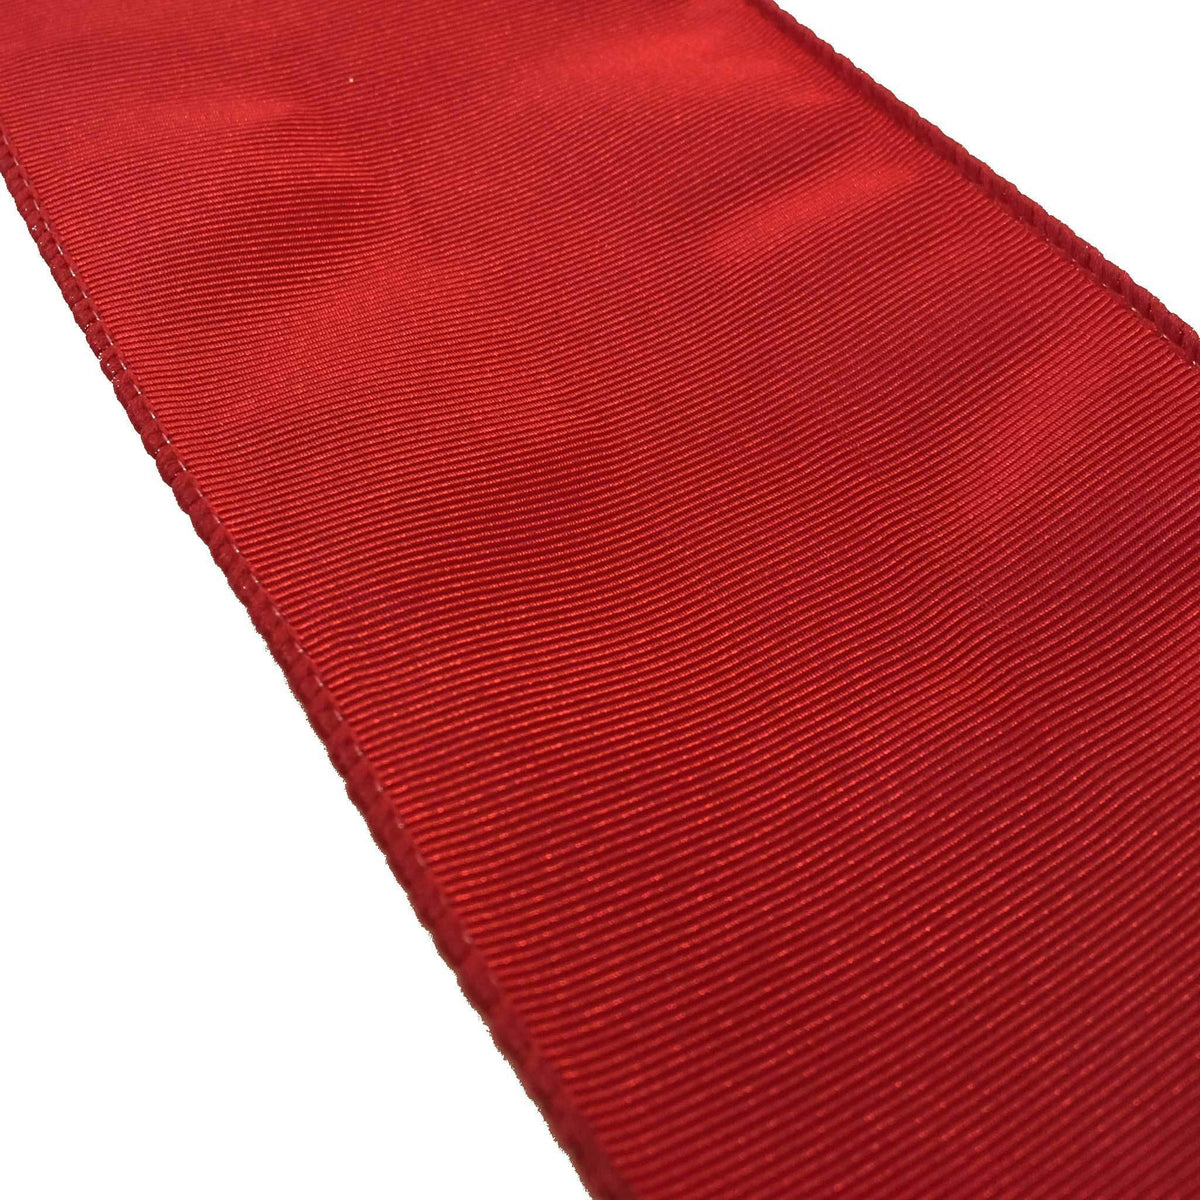 Up close of the pattern on Lee Display's roll of Red Bengaline Christmas Ribbon with a Wired-Edge on sale at leedisplay.com